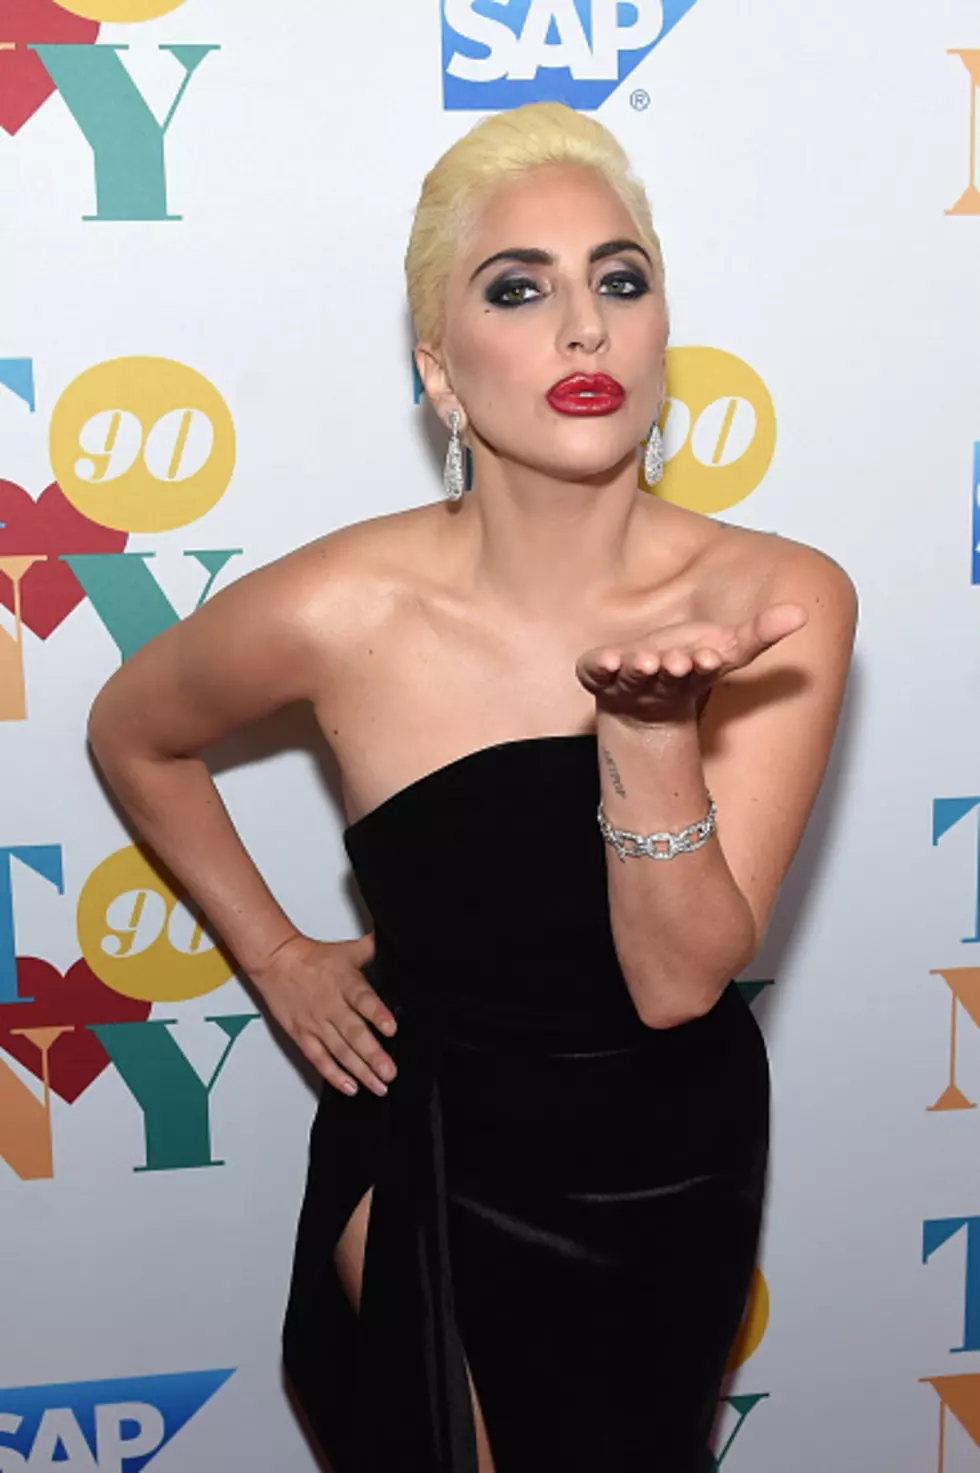 Lady Gaga And Other New Z-107.3 Music! [VIDEO]